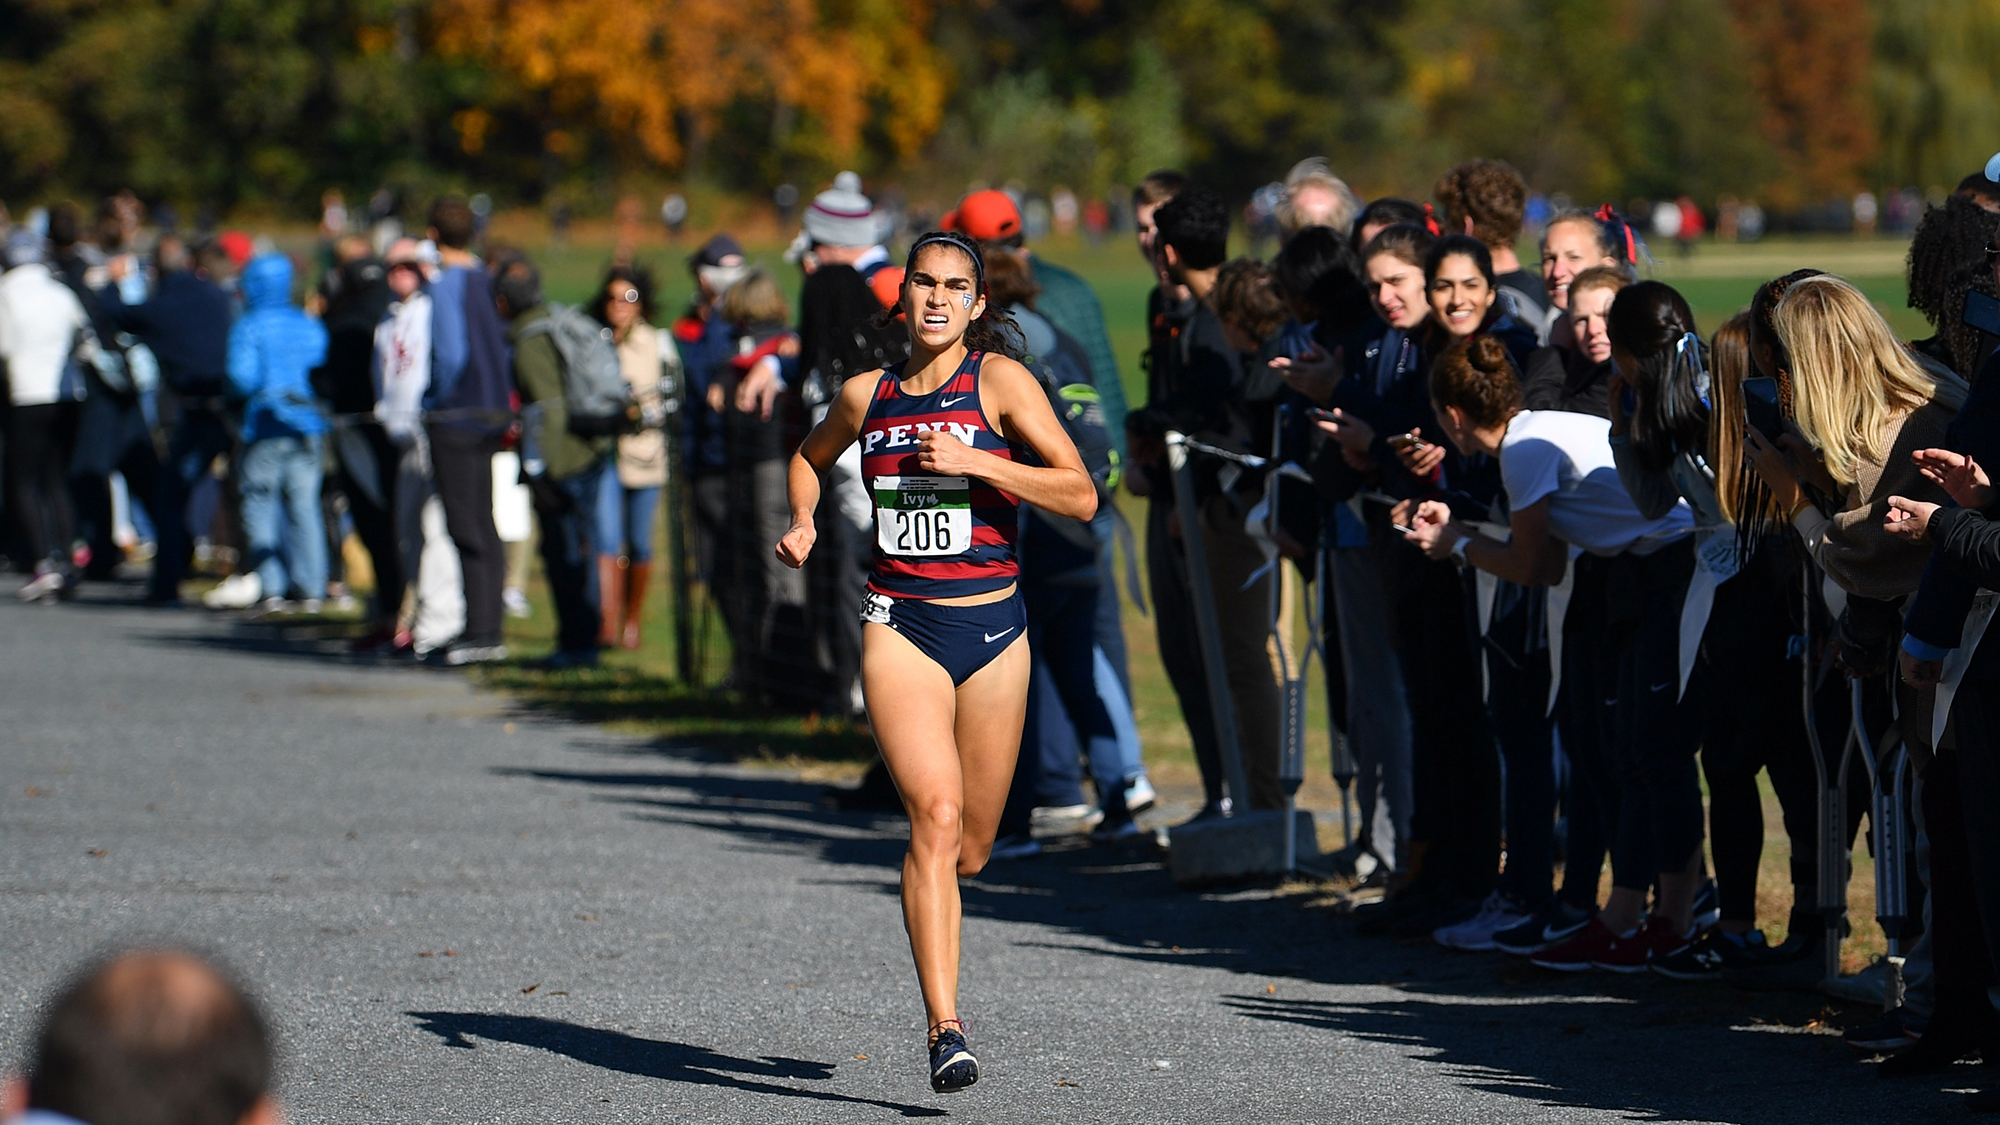 Senior Maddie Villalba of the women's cross country team runs on the pavement during a race.